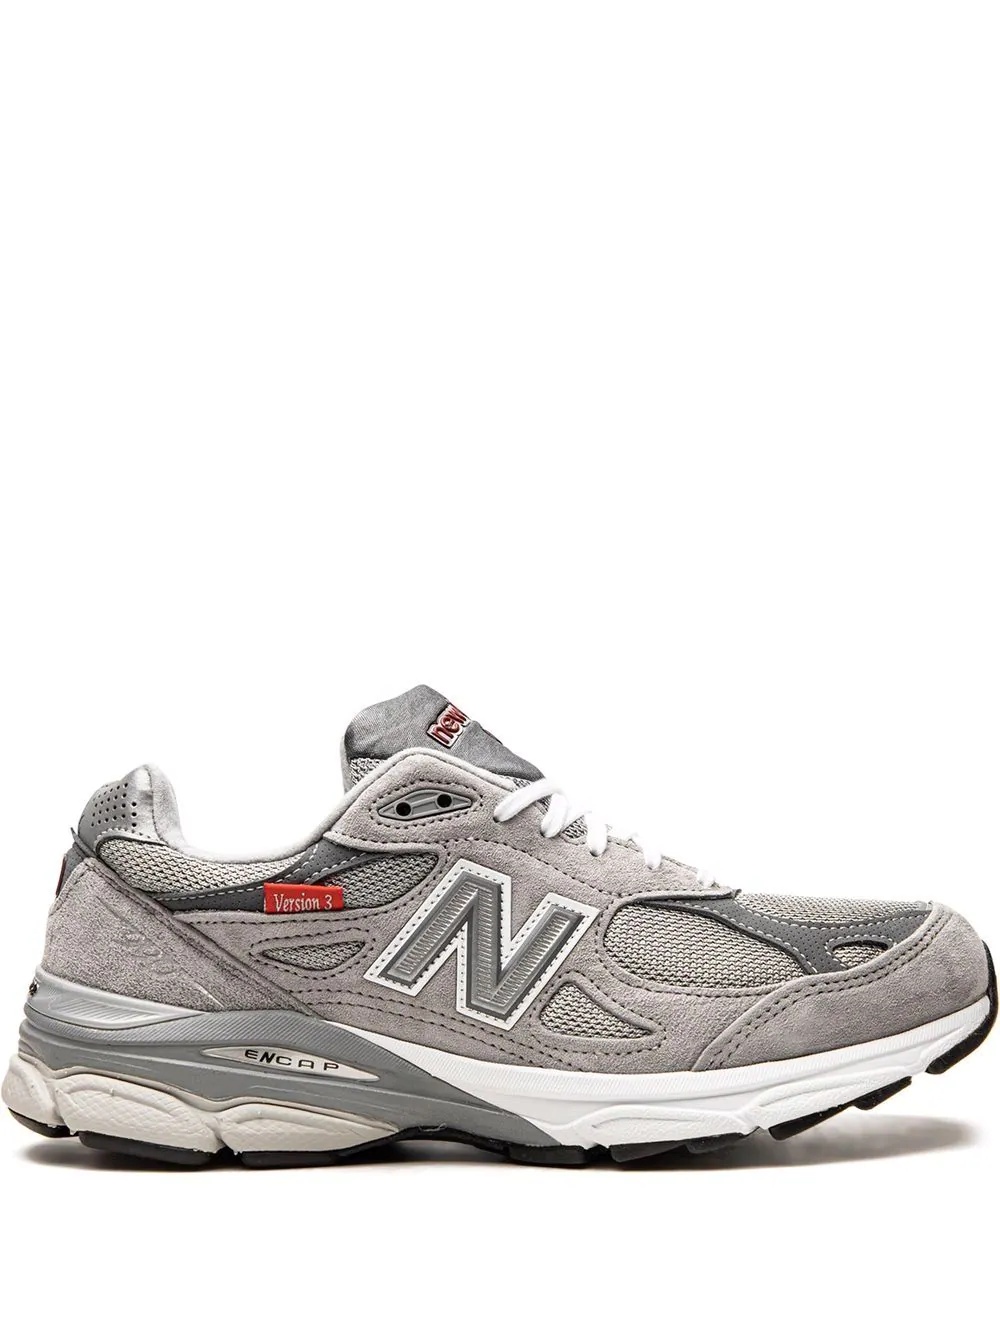 Made in USA 990v3 "Grey" sneakers - 1